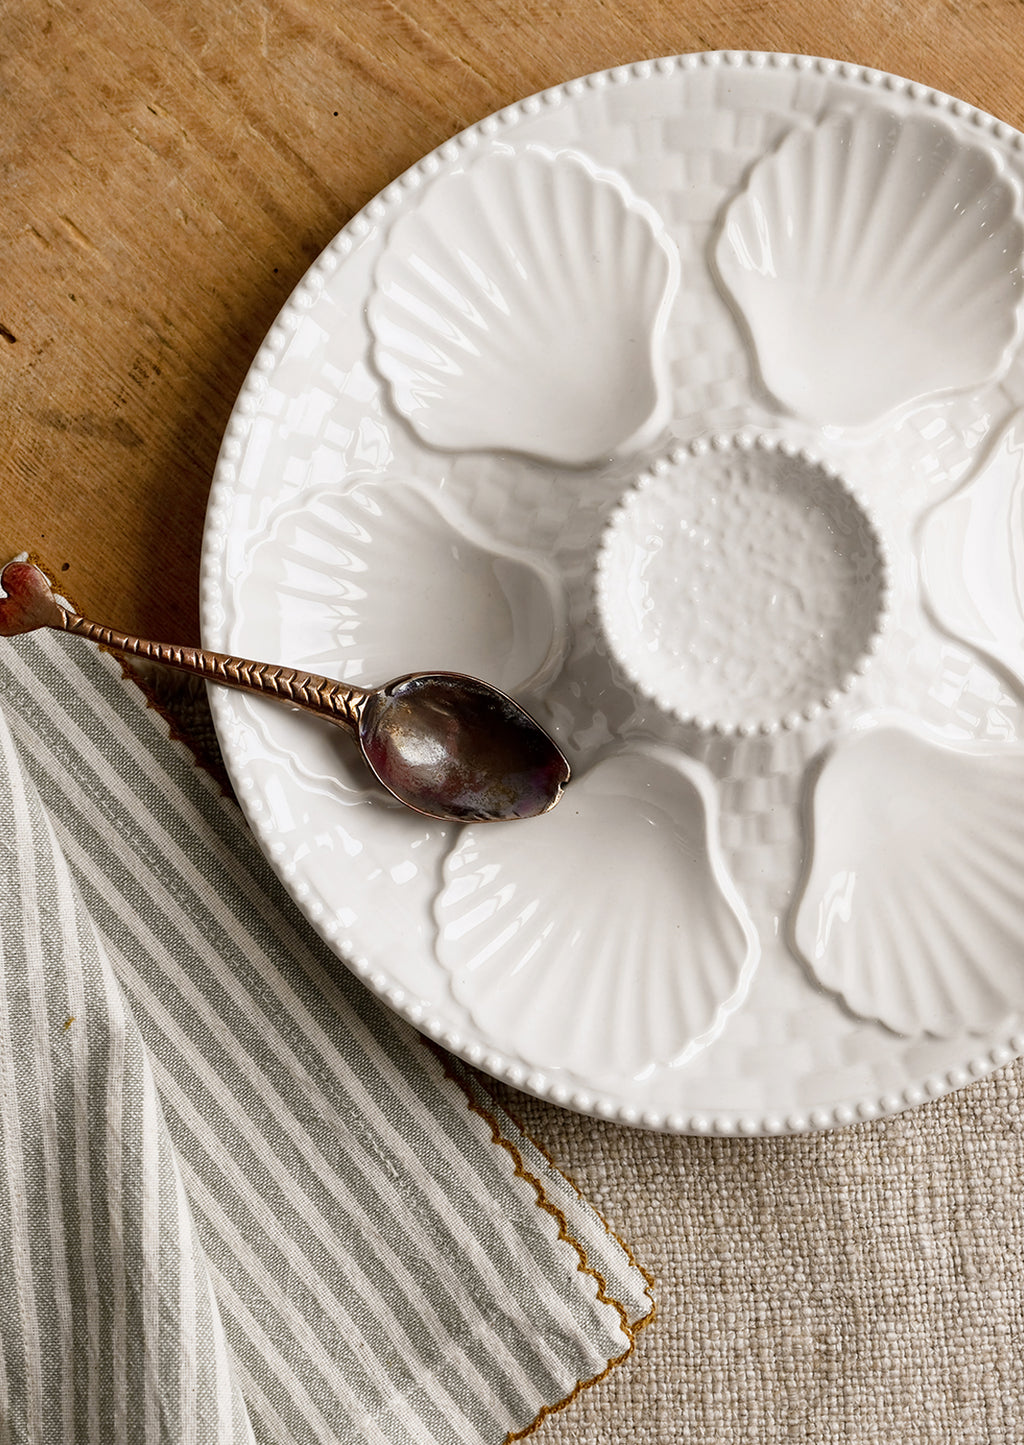 2: A glossy white ceramic plate with shell design.